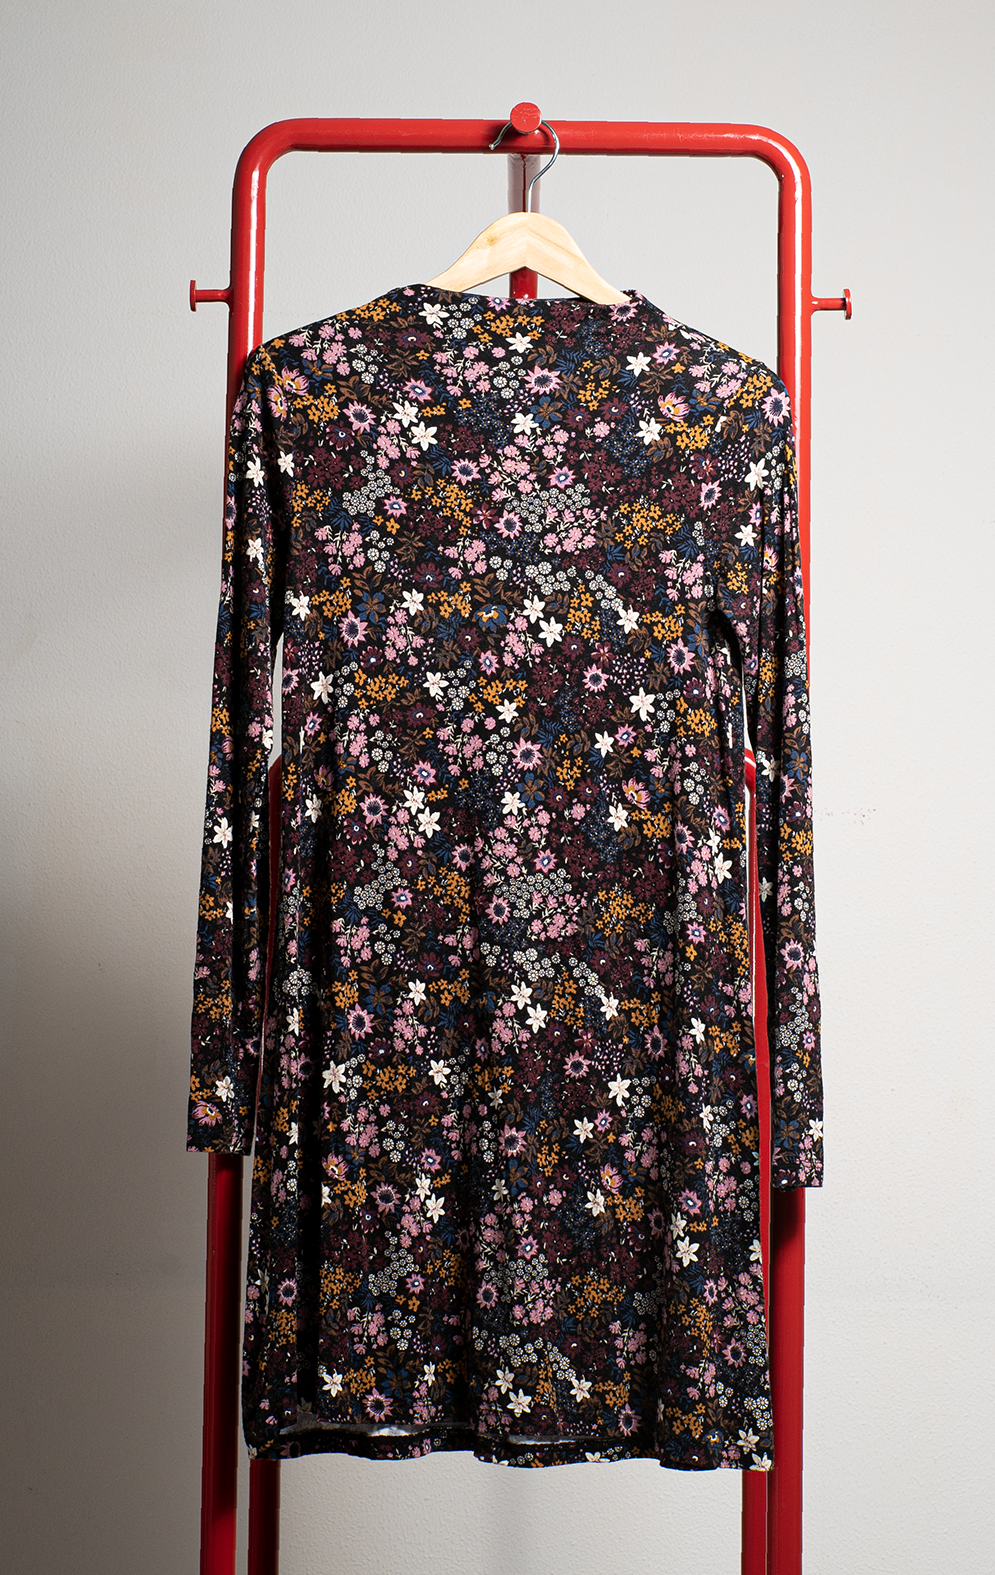 PULL & BEAR DRESS - Black with florals pink, white & yellow - Small